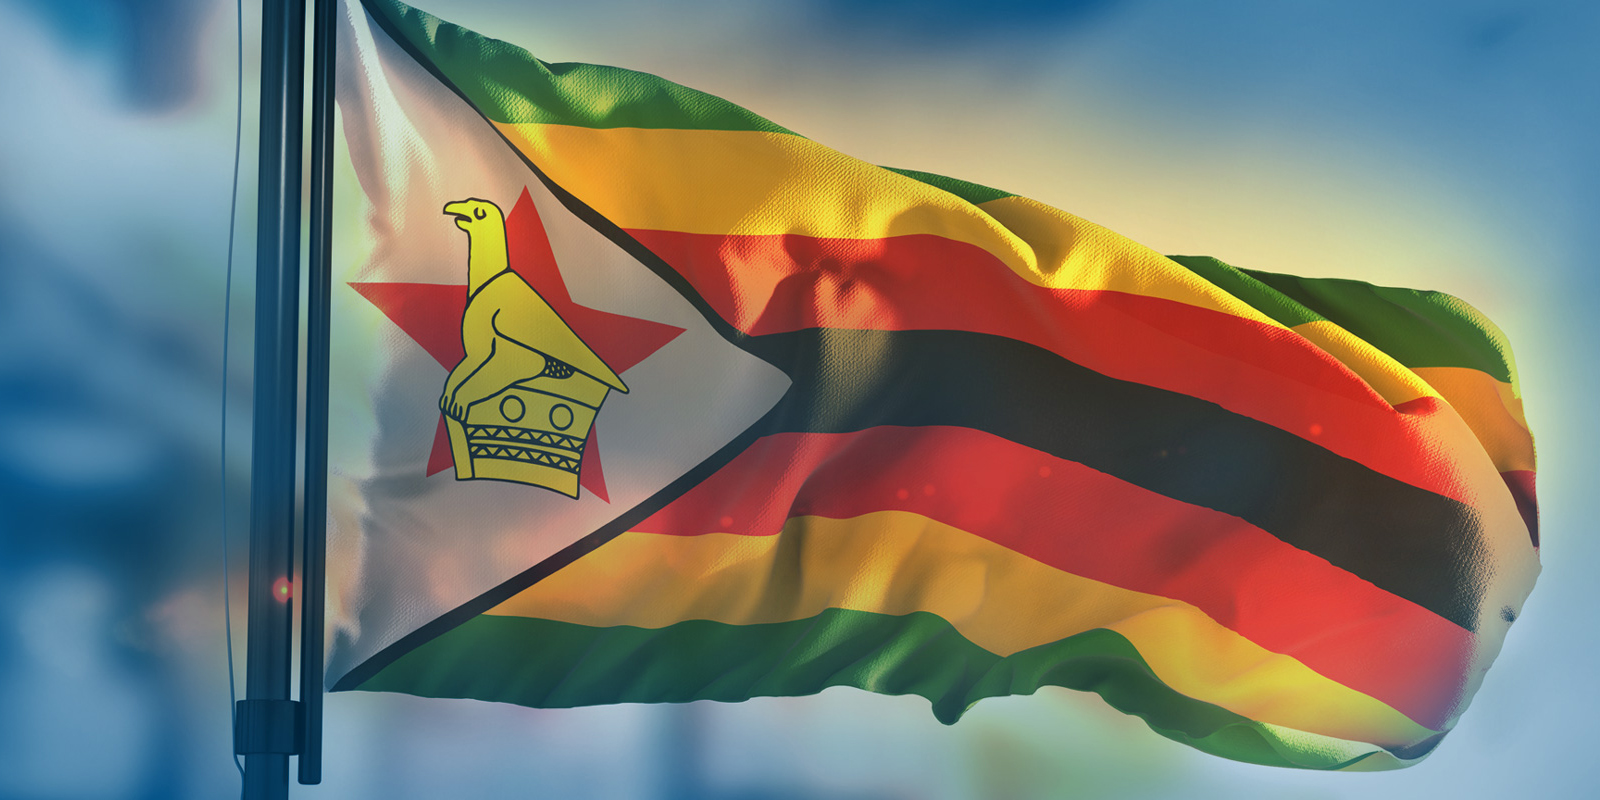 With Mugabe's Departure, Should Foreign Investors Reconsider Zimbabwe?